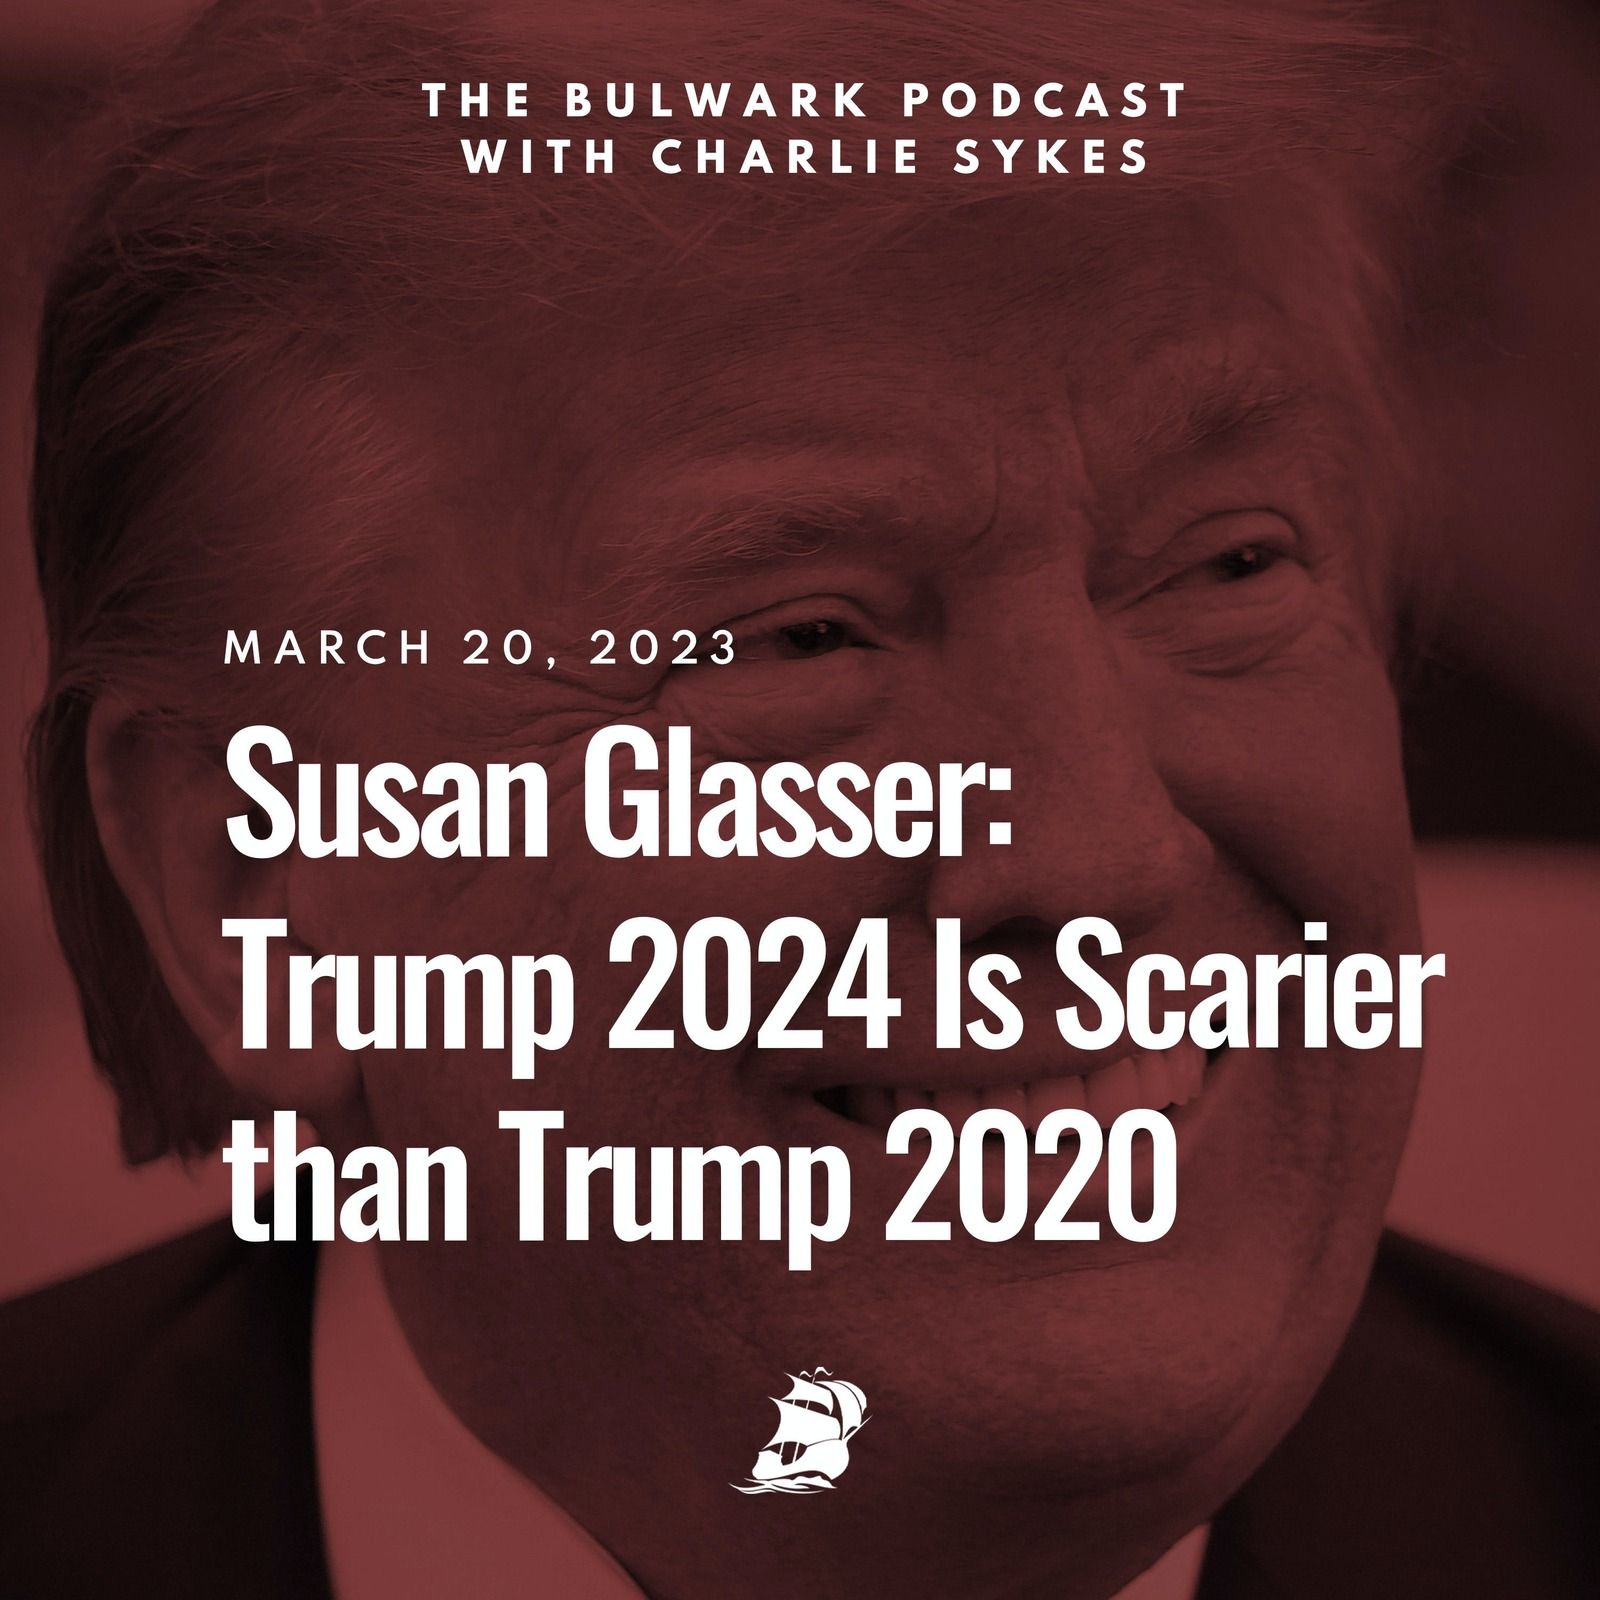 Susan Glasser: Trump 2024 Is Scarier than Trump 2020 by The Bulwark Podcast